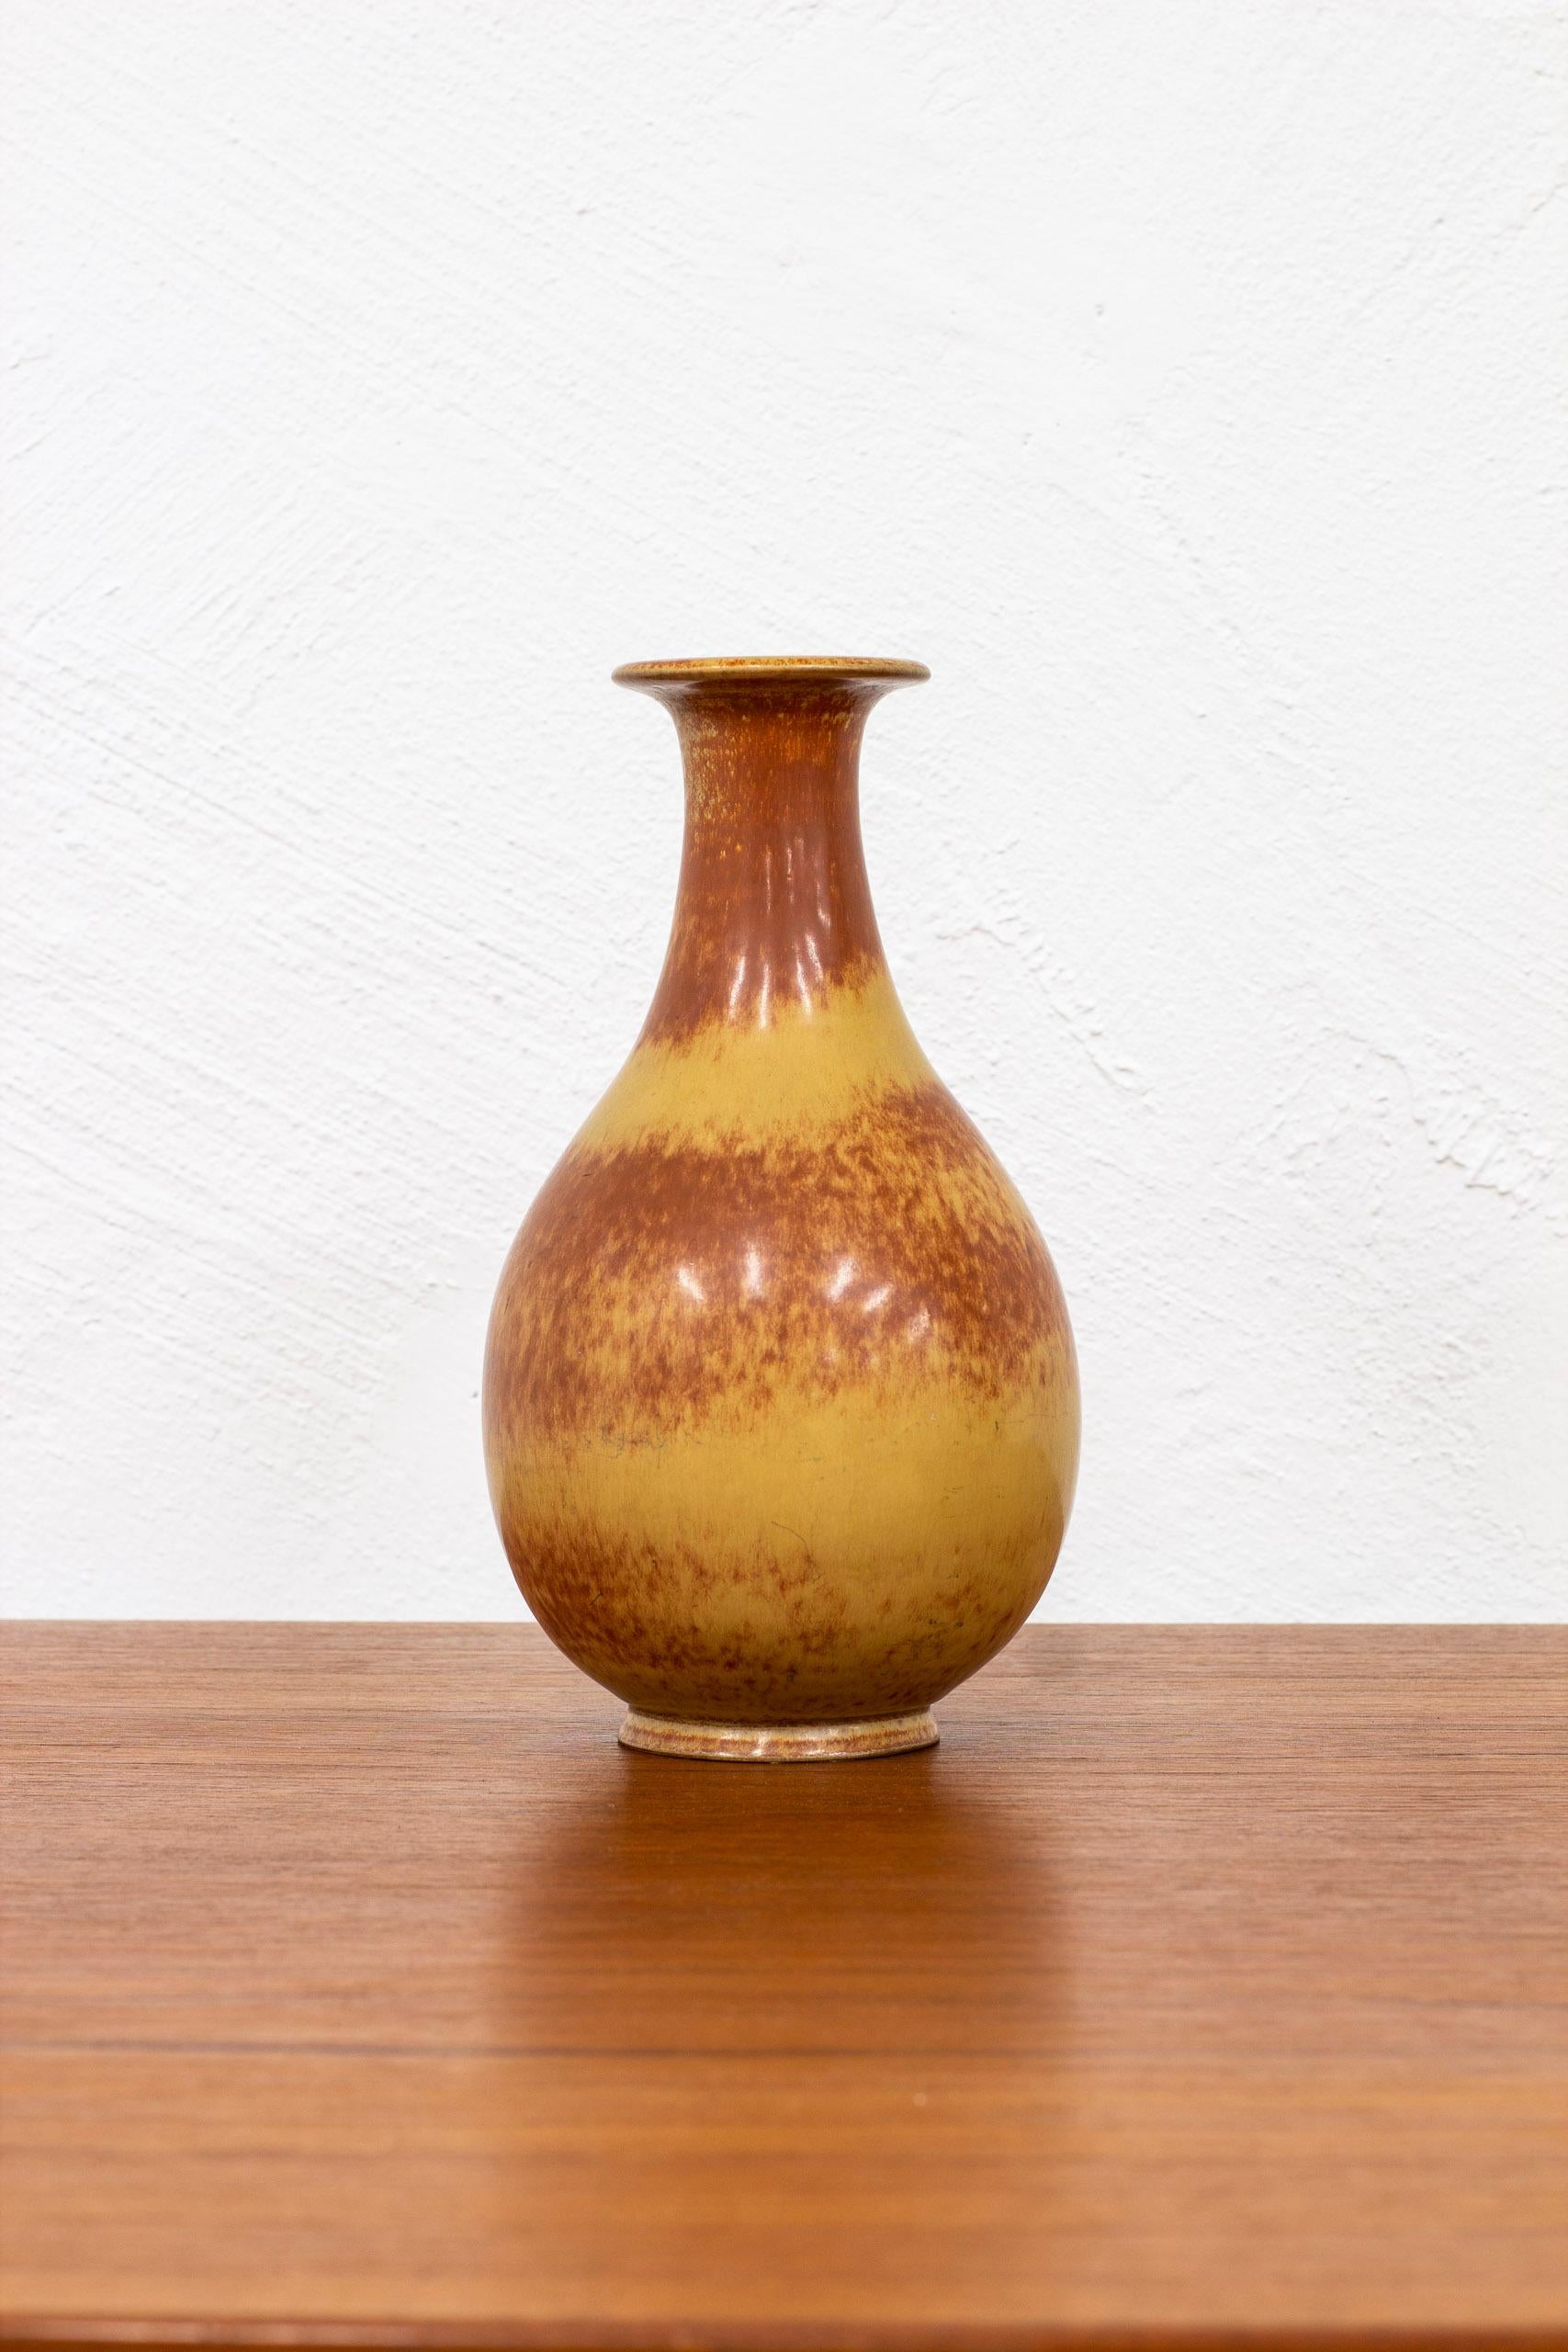 Stoneware vase designed by Gunnar Nylund. Hand made at Rörstrand in the 1940s. Glaze with burnt brown tones. Very good vintage condition with light wear and patina.

Dimensions: H. 24 Ø. 14 cm.

